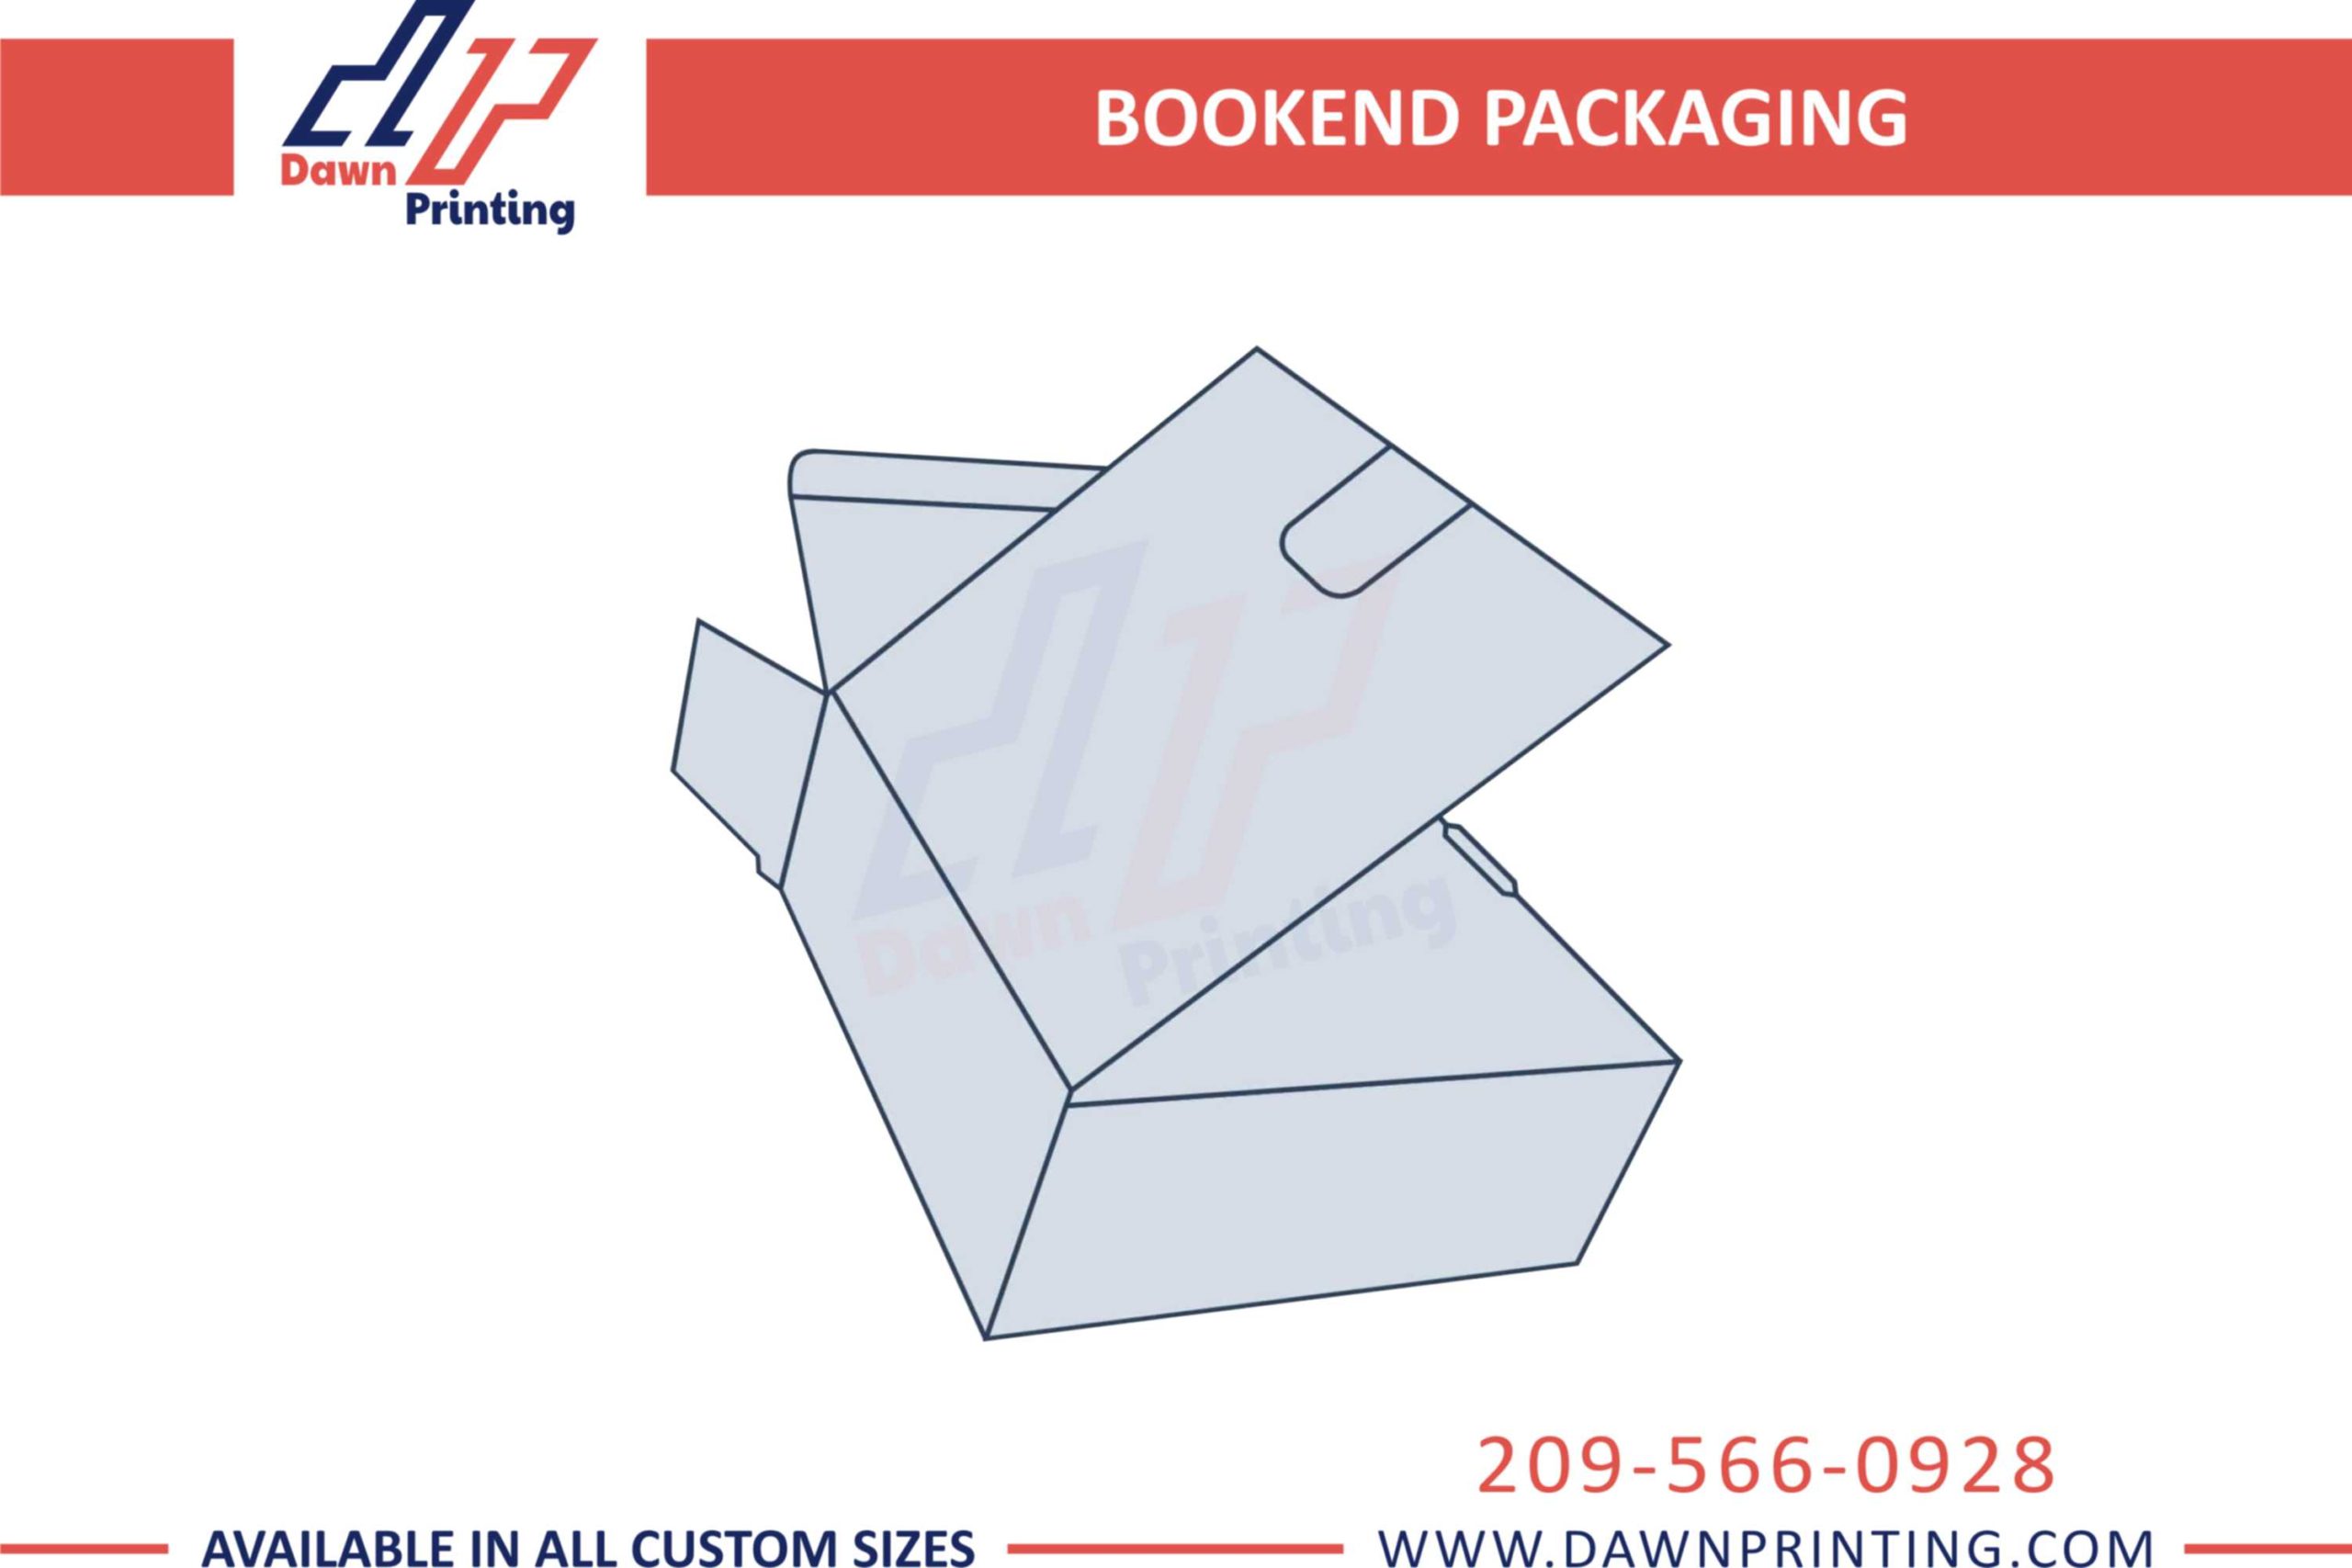 Economical Bookened Boxes - Dawn Printing